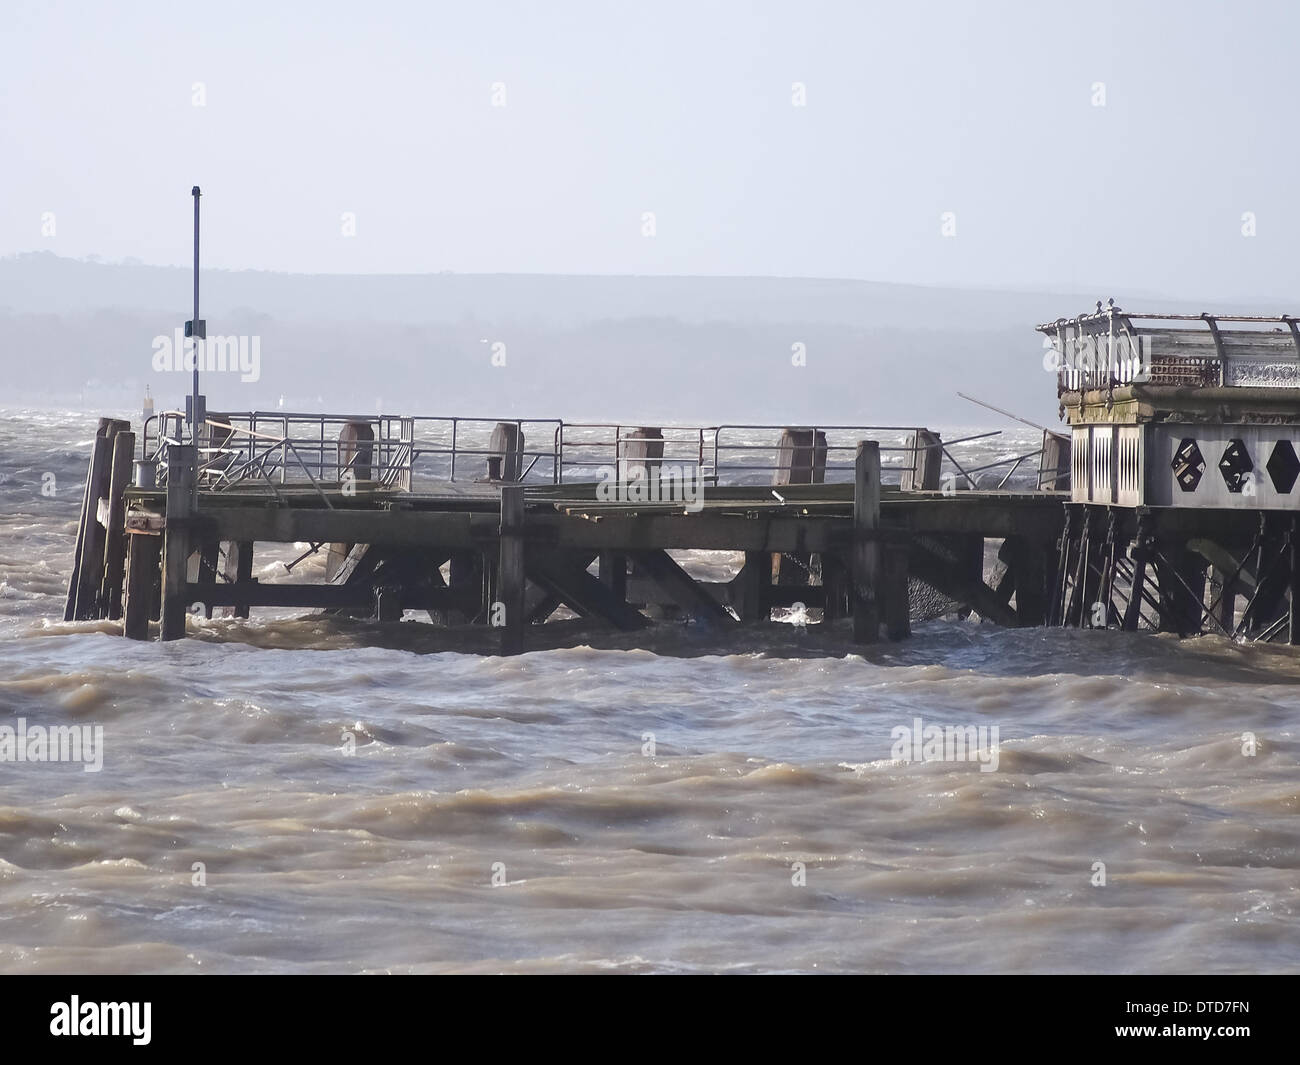 Damage caused to South Parade Pier, Southsea Portsmouth, England after weeks extreme weather. Stock Photo